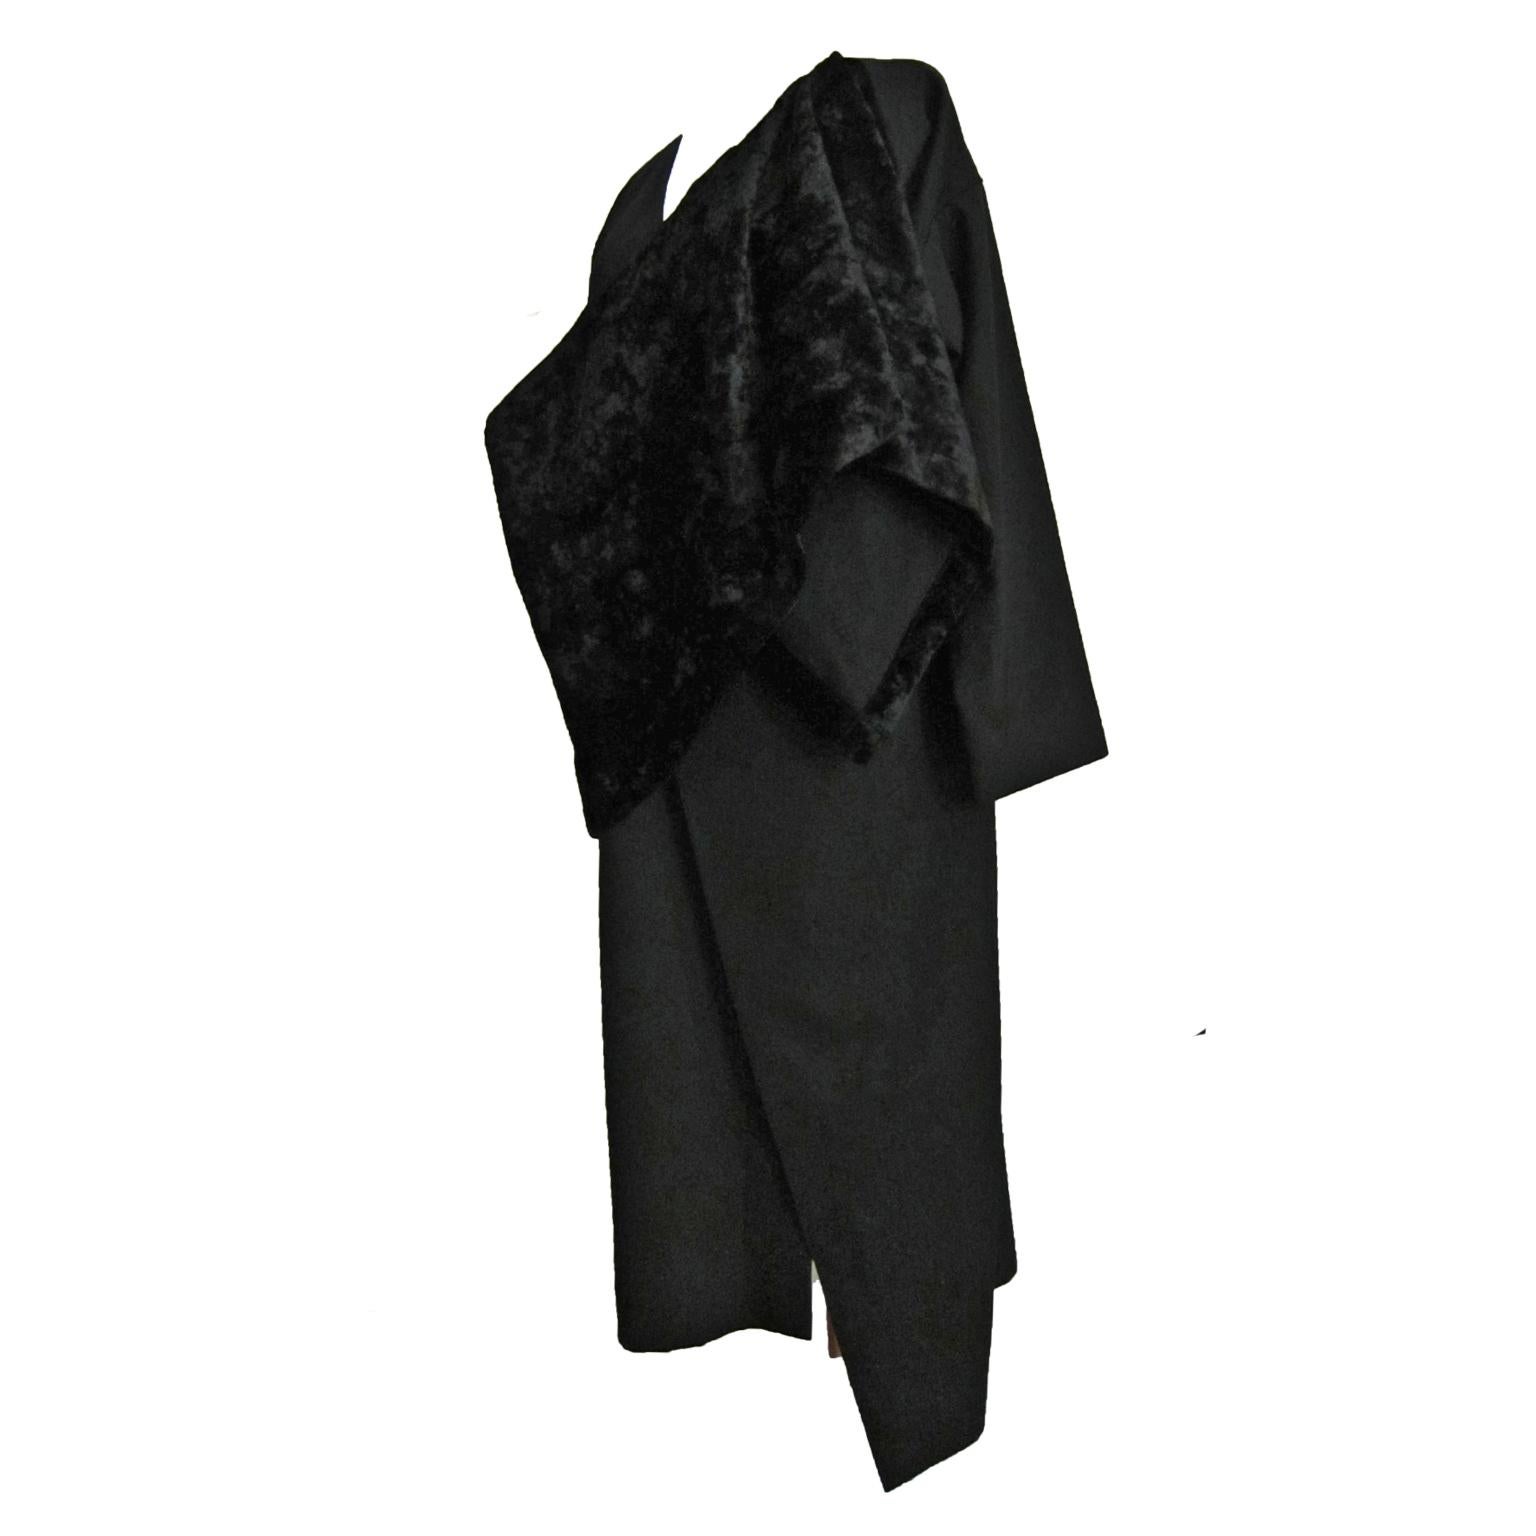 Incredible Comme des Garcons Tricot coat from AD 1999.
It has various silhouettes by turning shawl collar front piece as scarf or lowering. 
With one front button closure. 
Size : Free
Shoulder : 52 cm
Width : circa 50 cm
Length : 121 cm